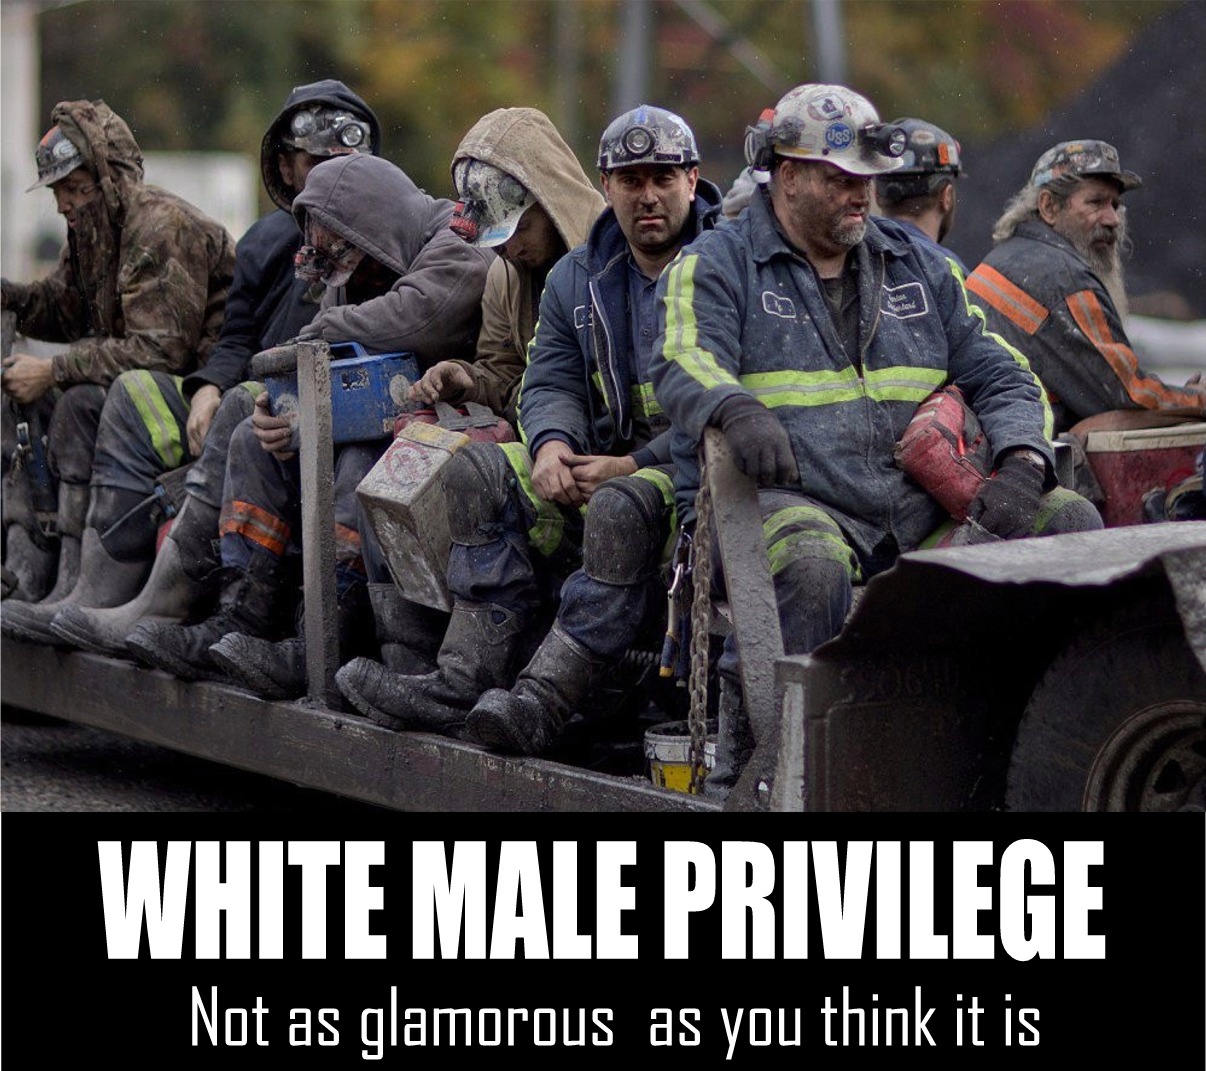 kentucky coal miners - White Male Privilege Not as glamorous as you think it is a S A